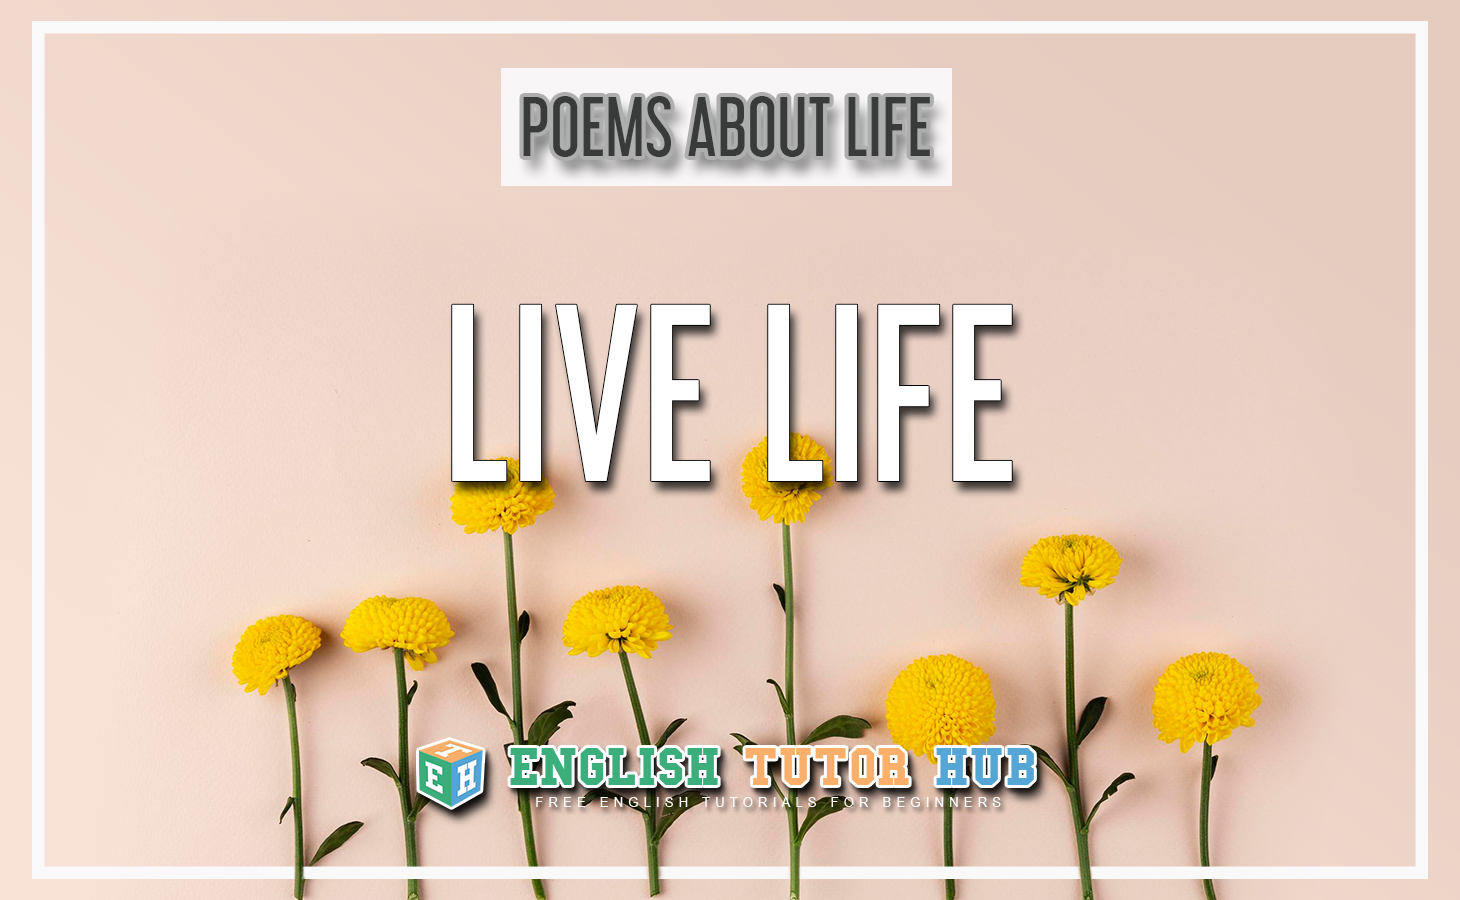 Poems About Life - Live Life